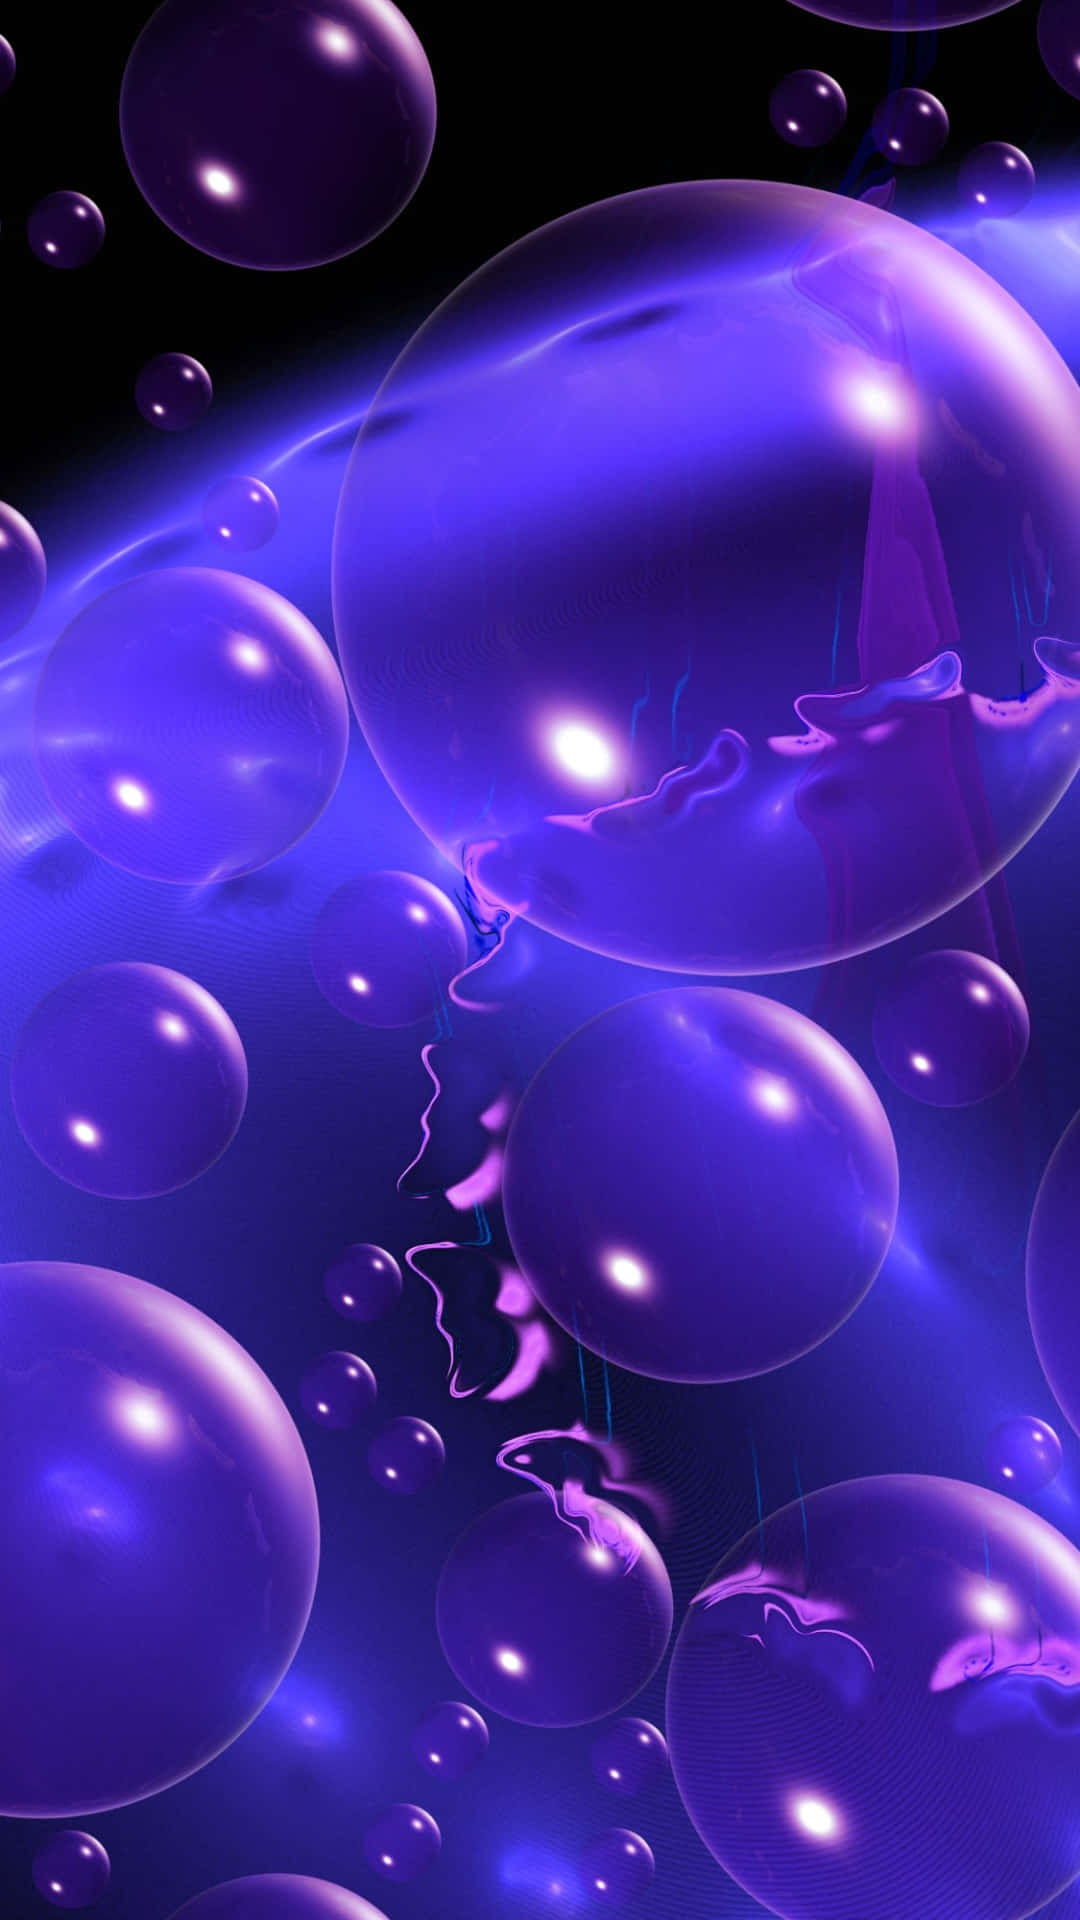 A Purple Background With Bubbles Floating In It Wallpaper